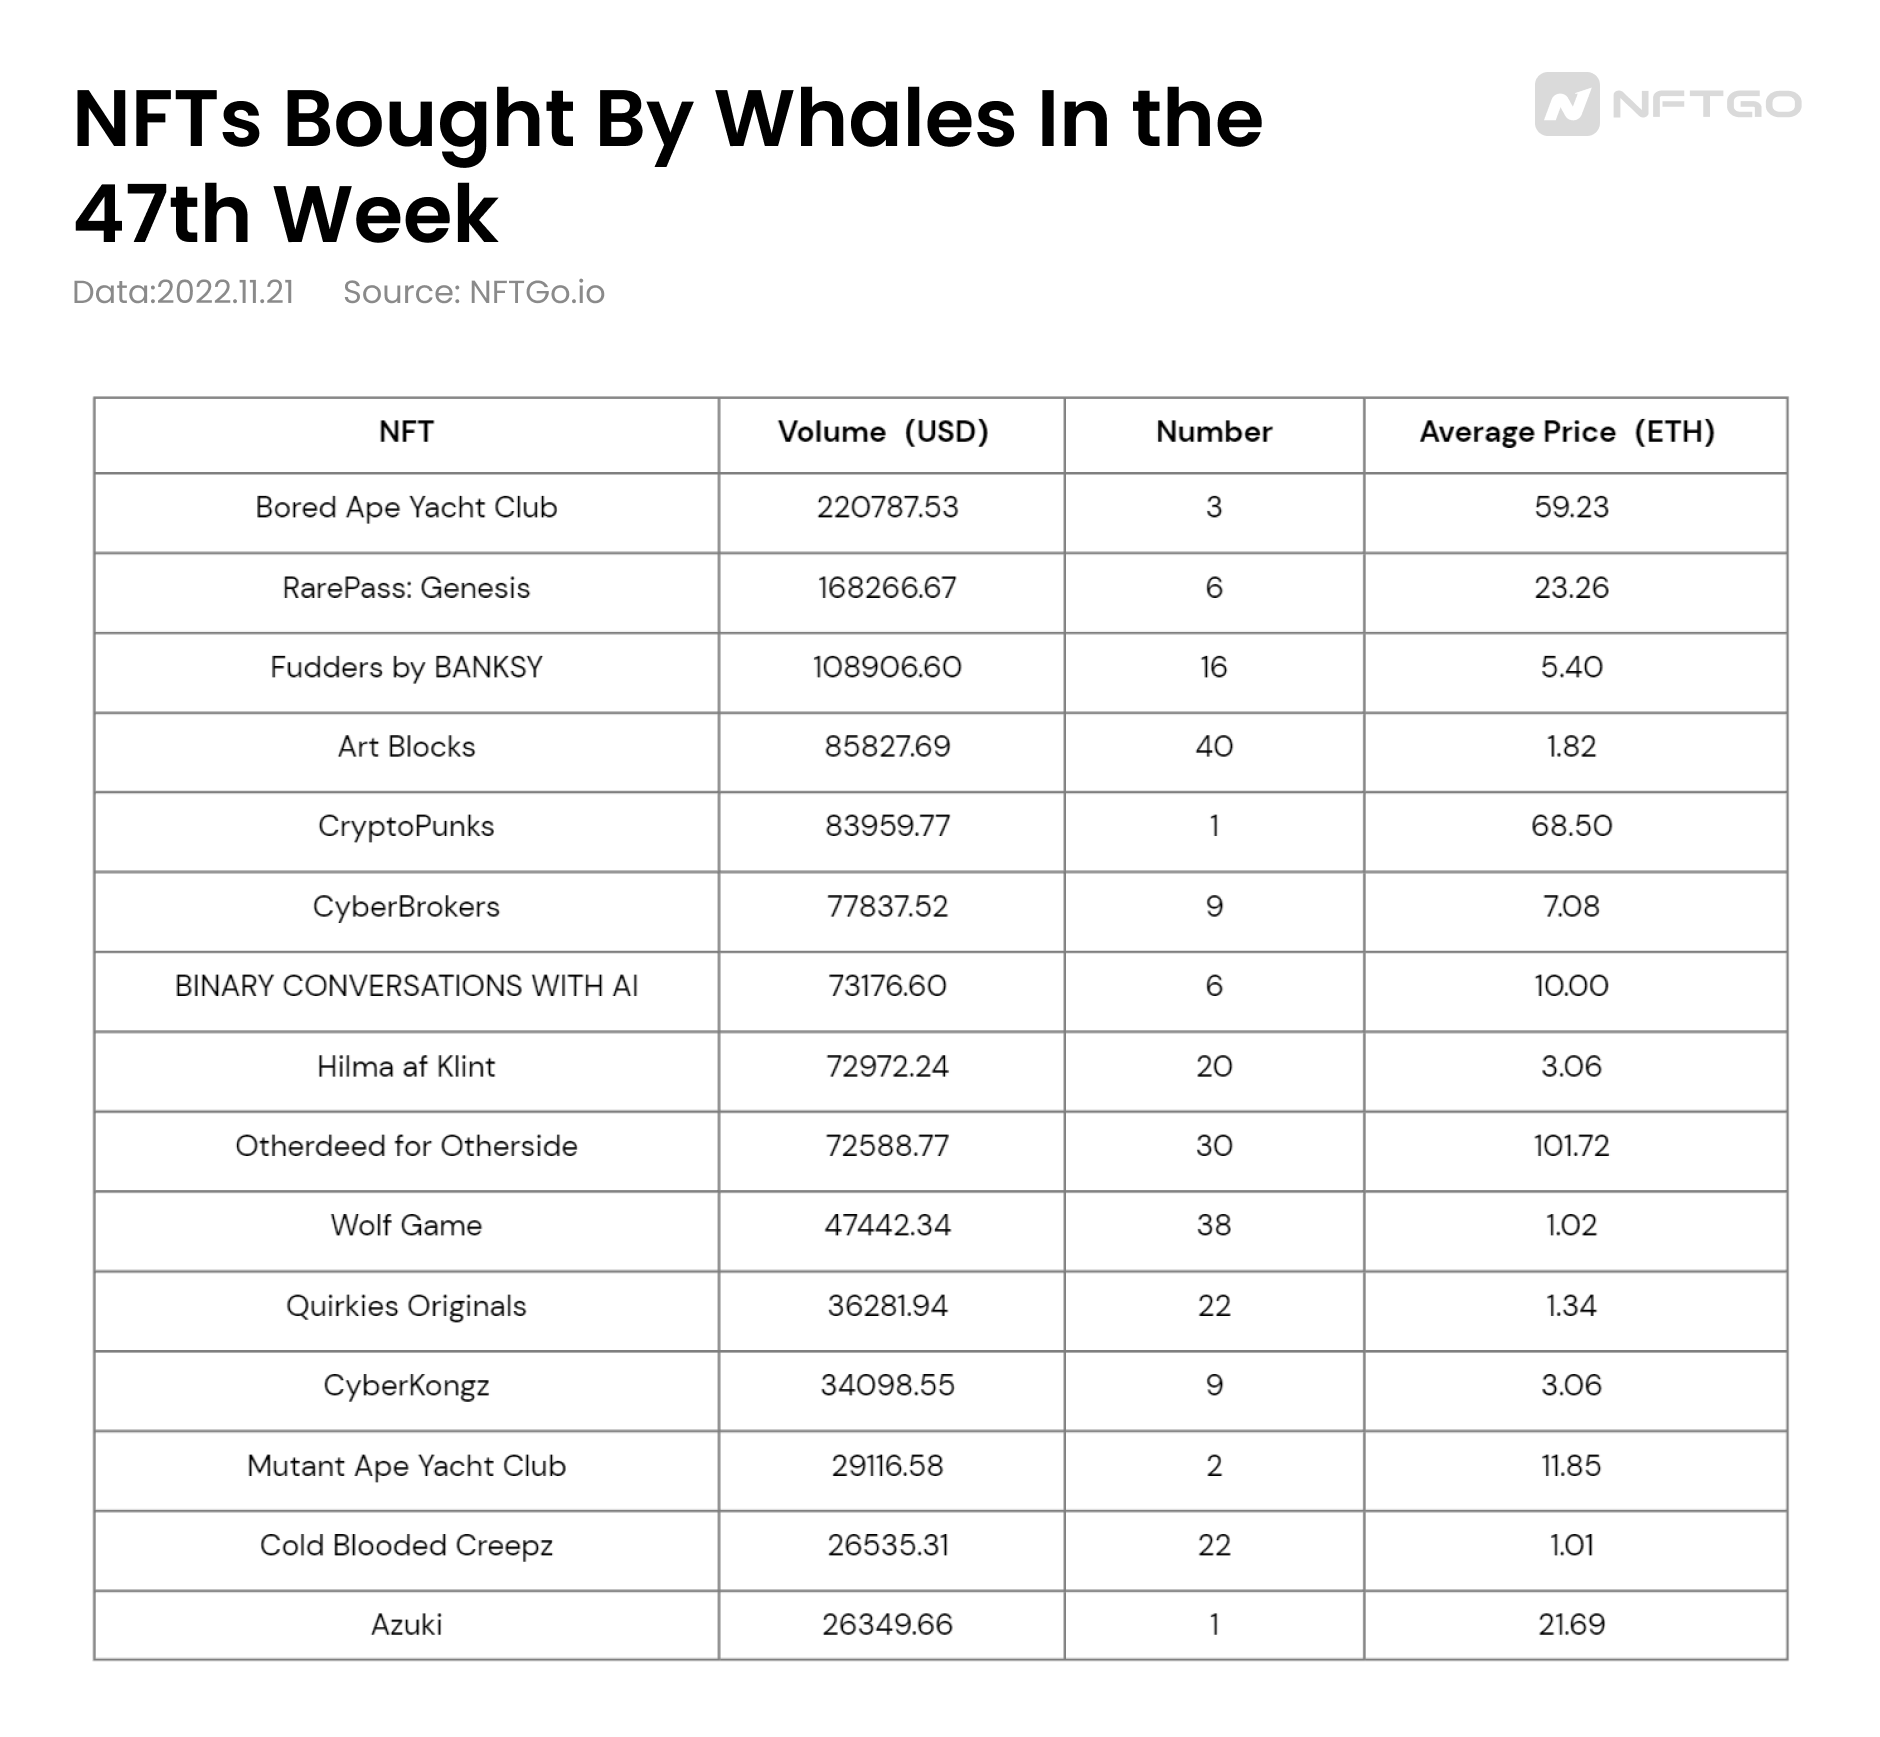 NFTs Bought by Whales (Source: nftgo.io)